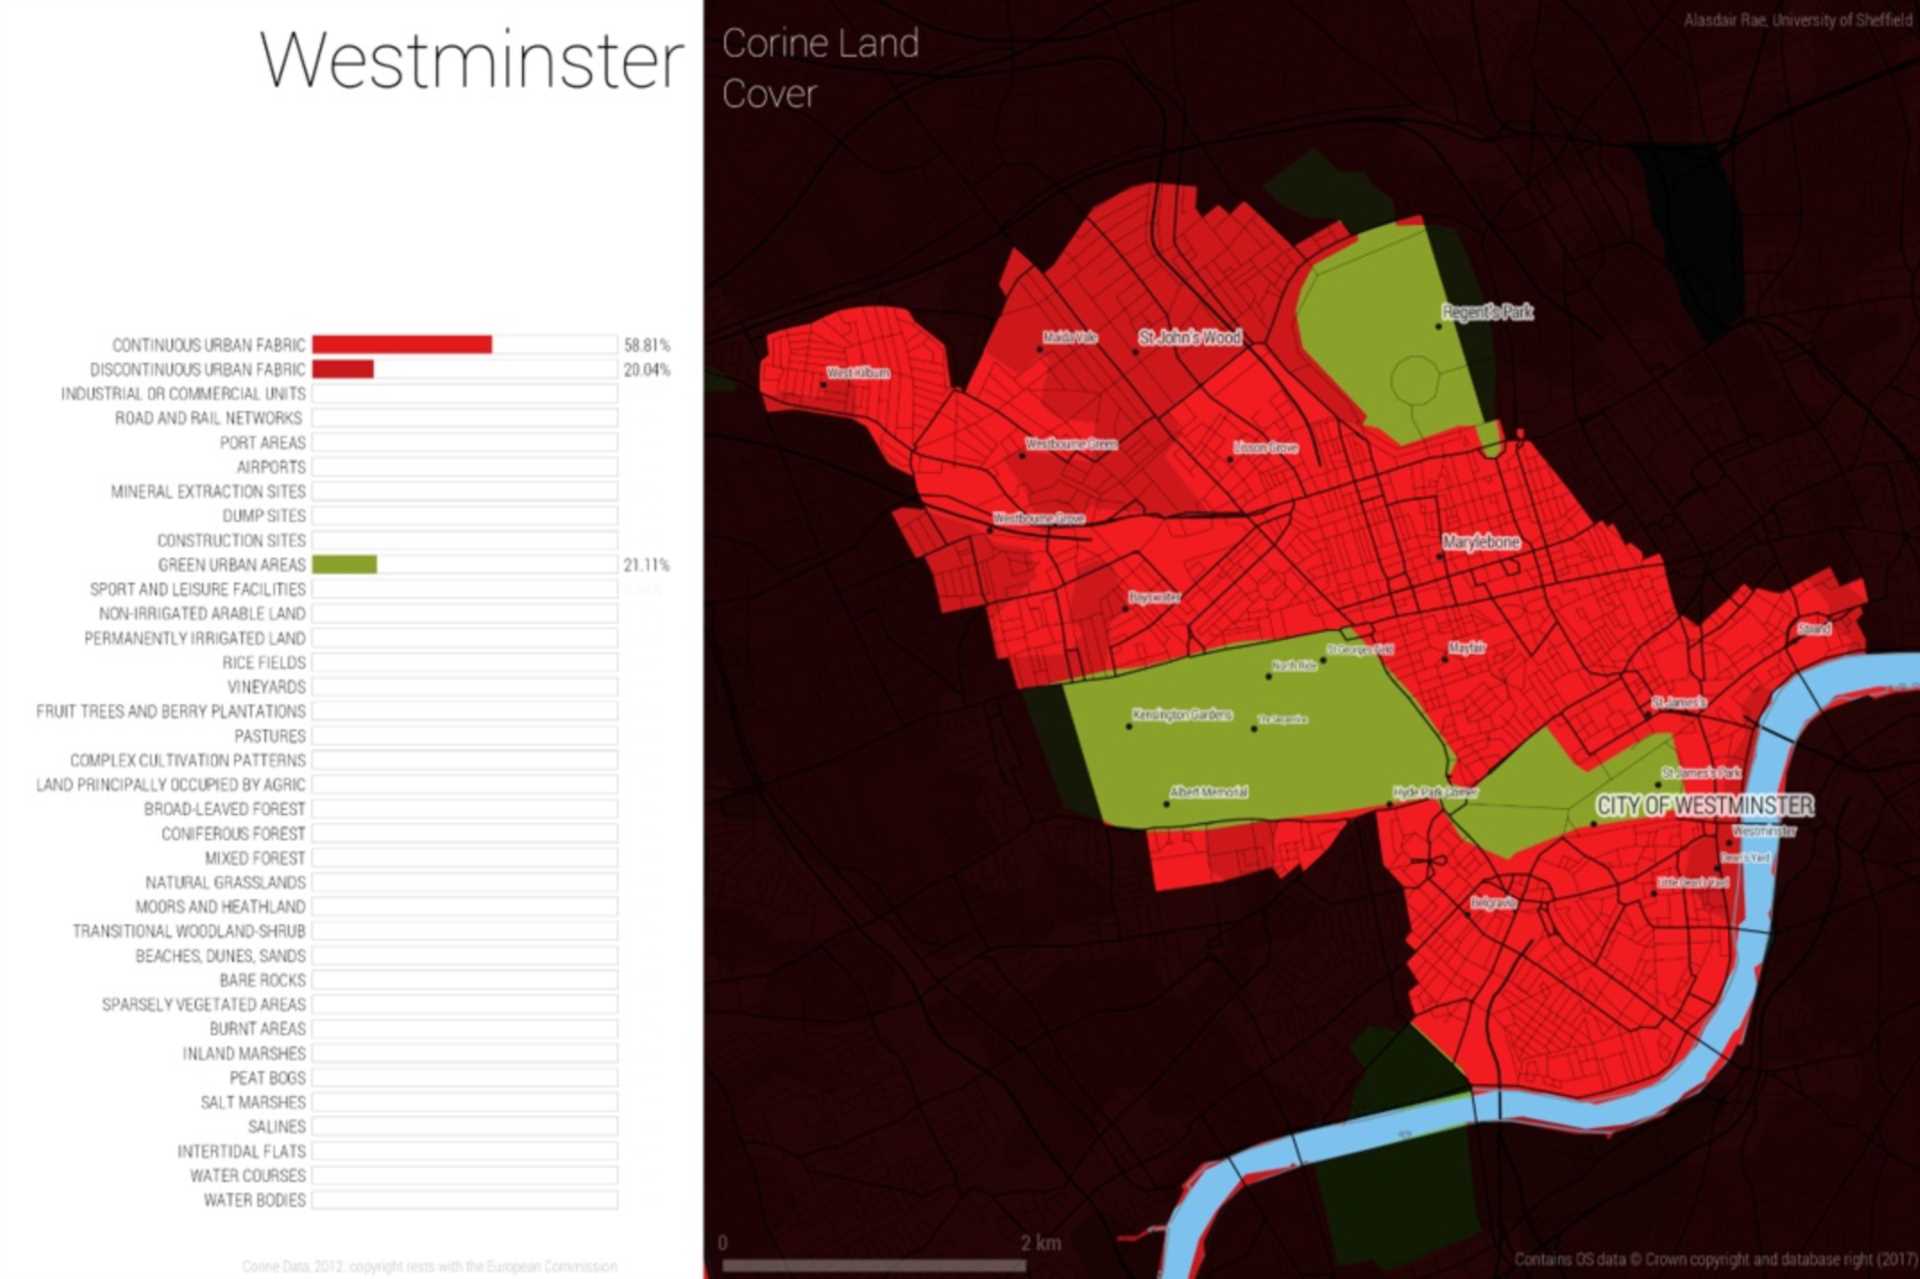 78.85% of Marylebone and Westminster is Built on ... Building Plot Dilemma or Not?